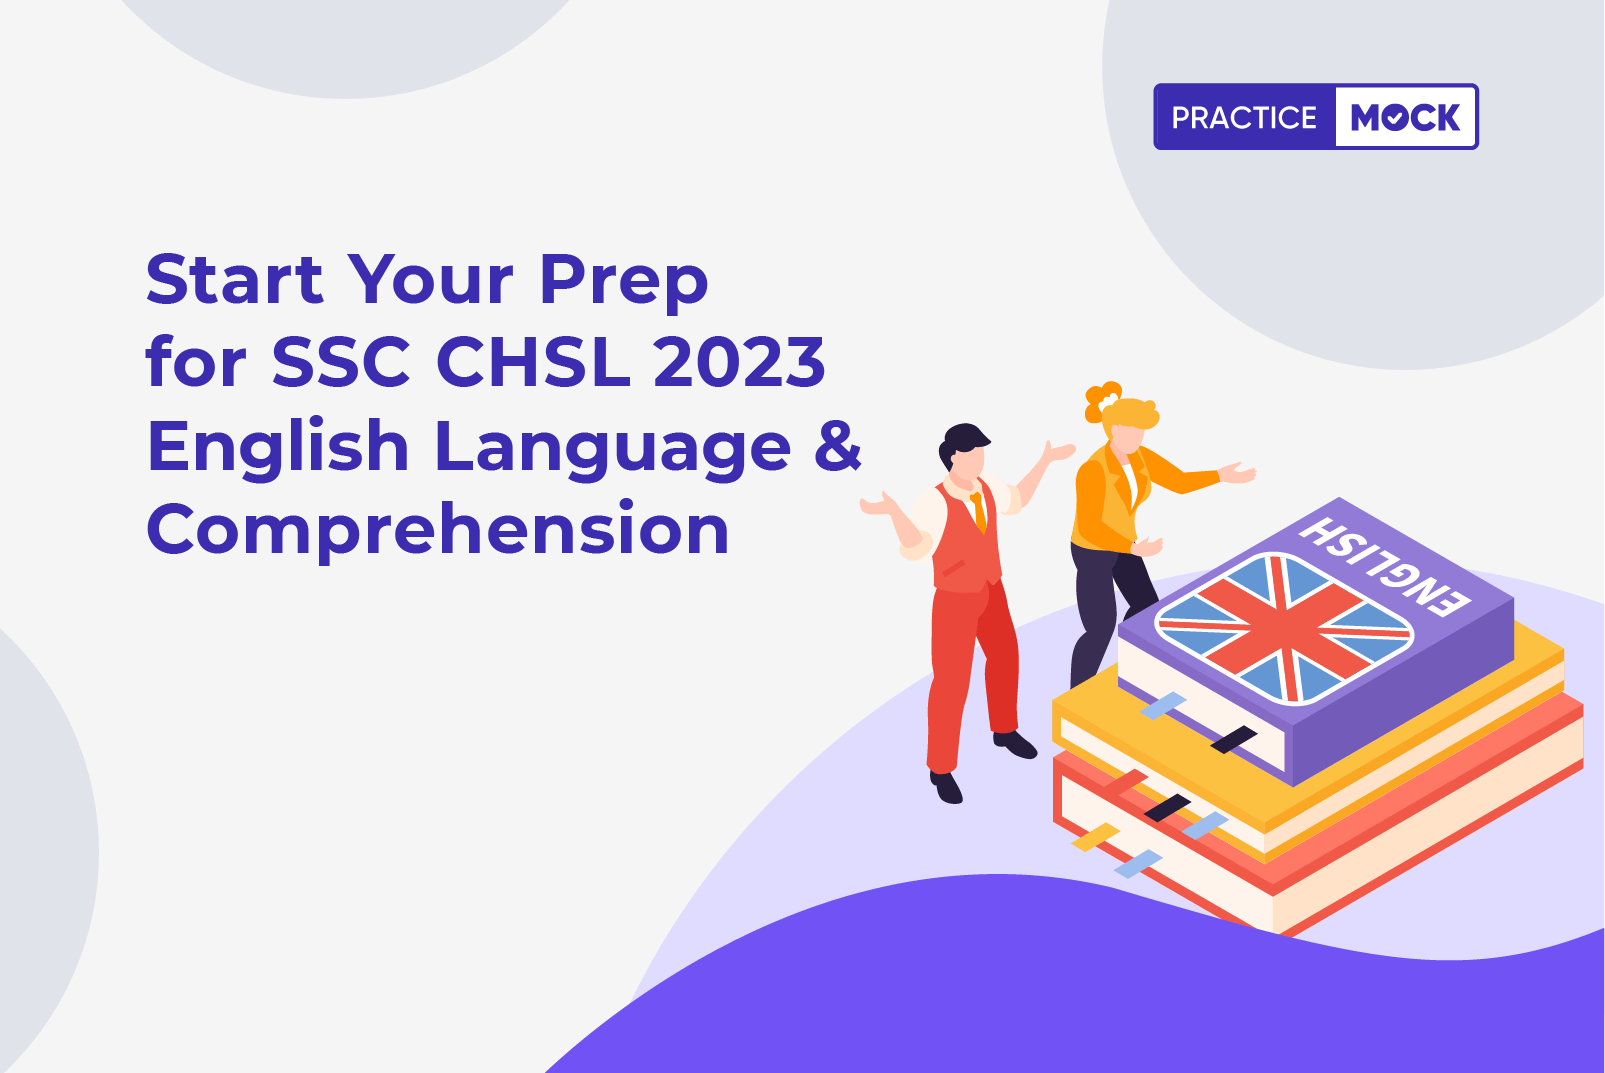 Start Your Prep for SSC CHSL English Language & Comprehension